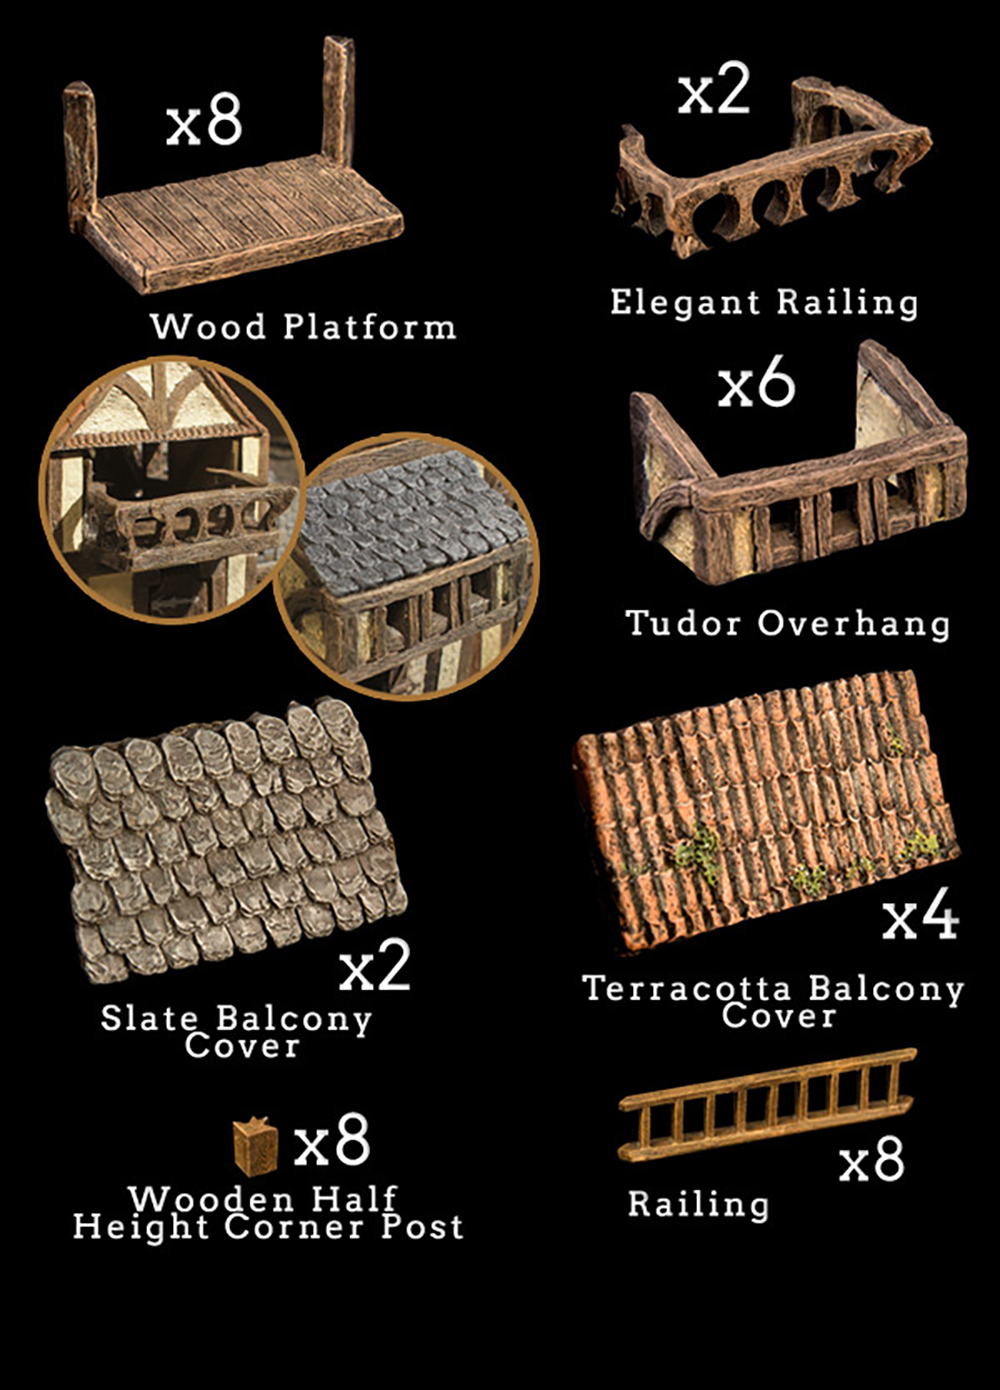 Dwarven Forge Dwarvenite Cities Deluxe Balcony Add-On DXB